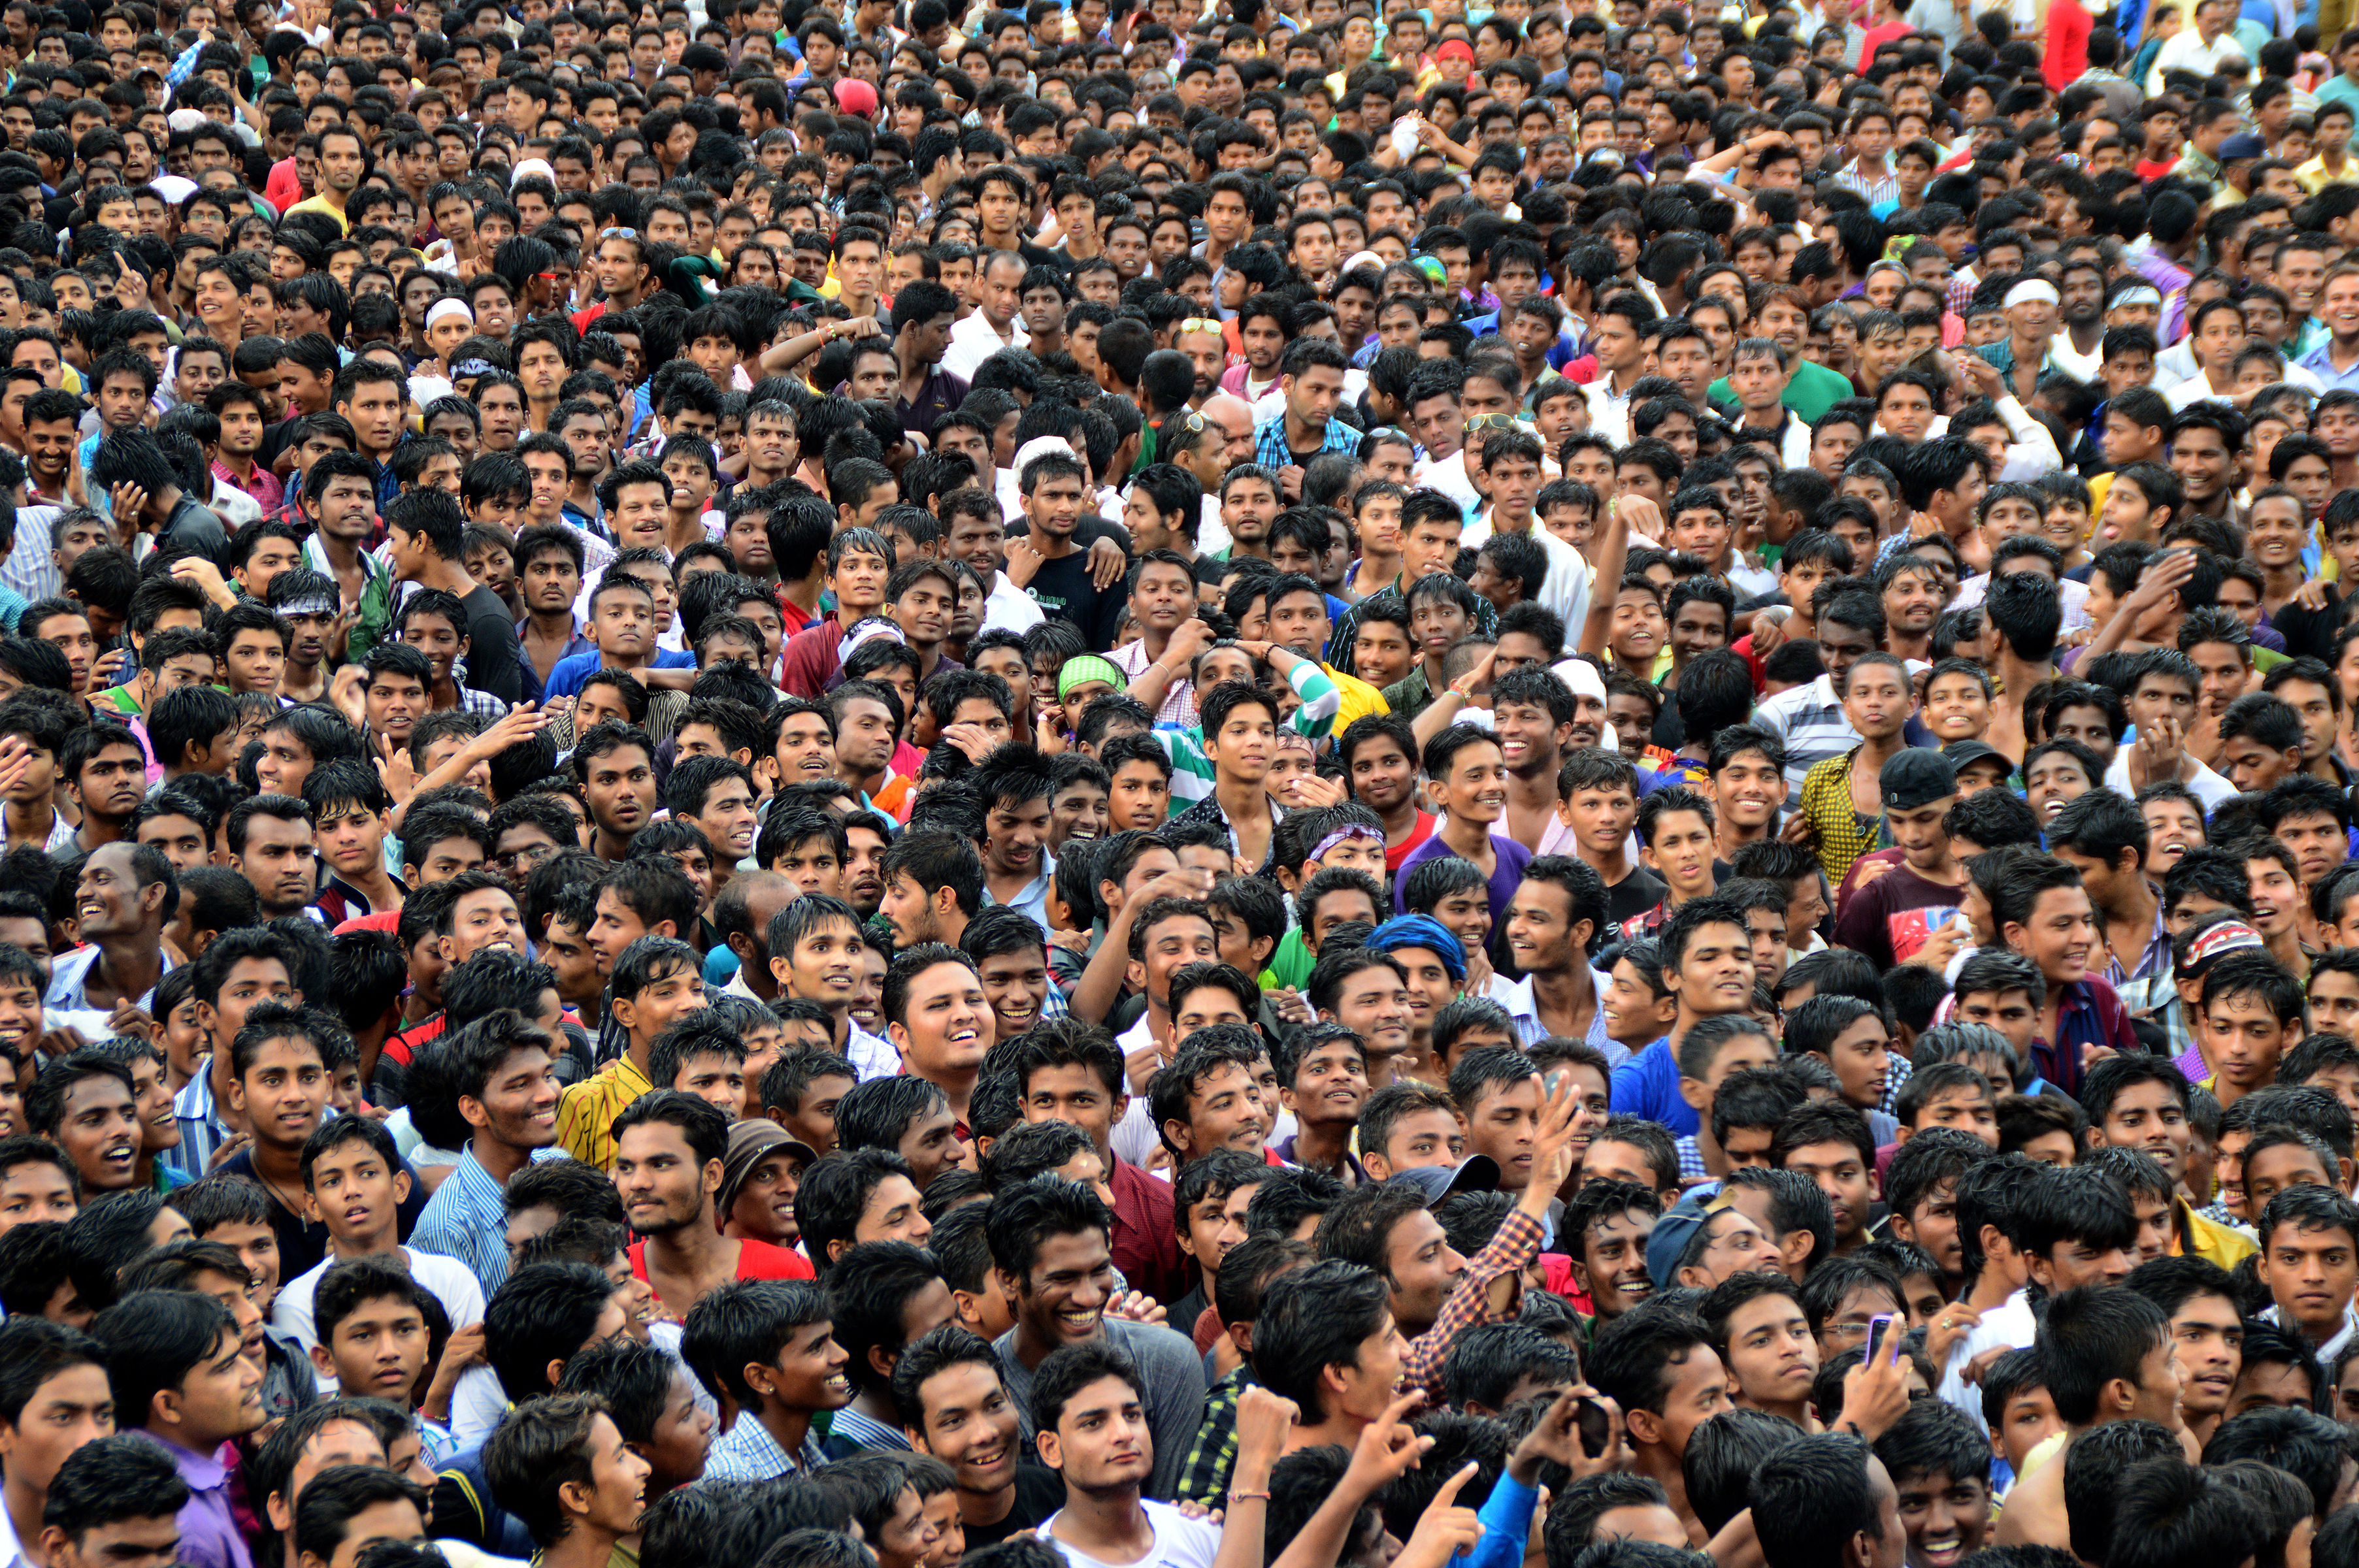 Population scare: What Modi said, what numbers say